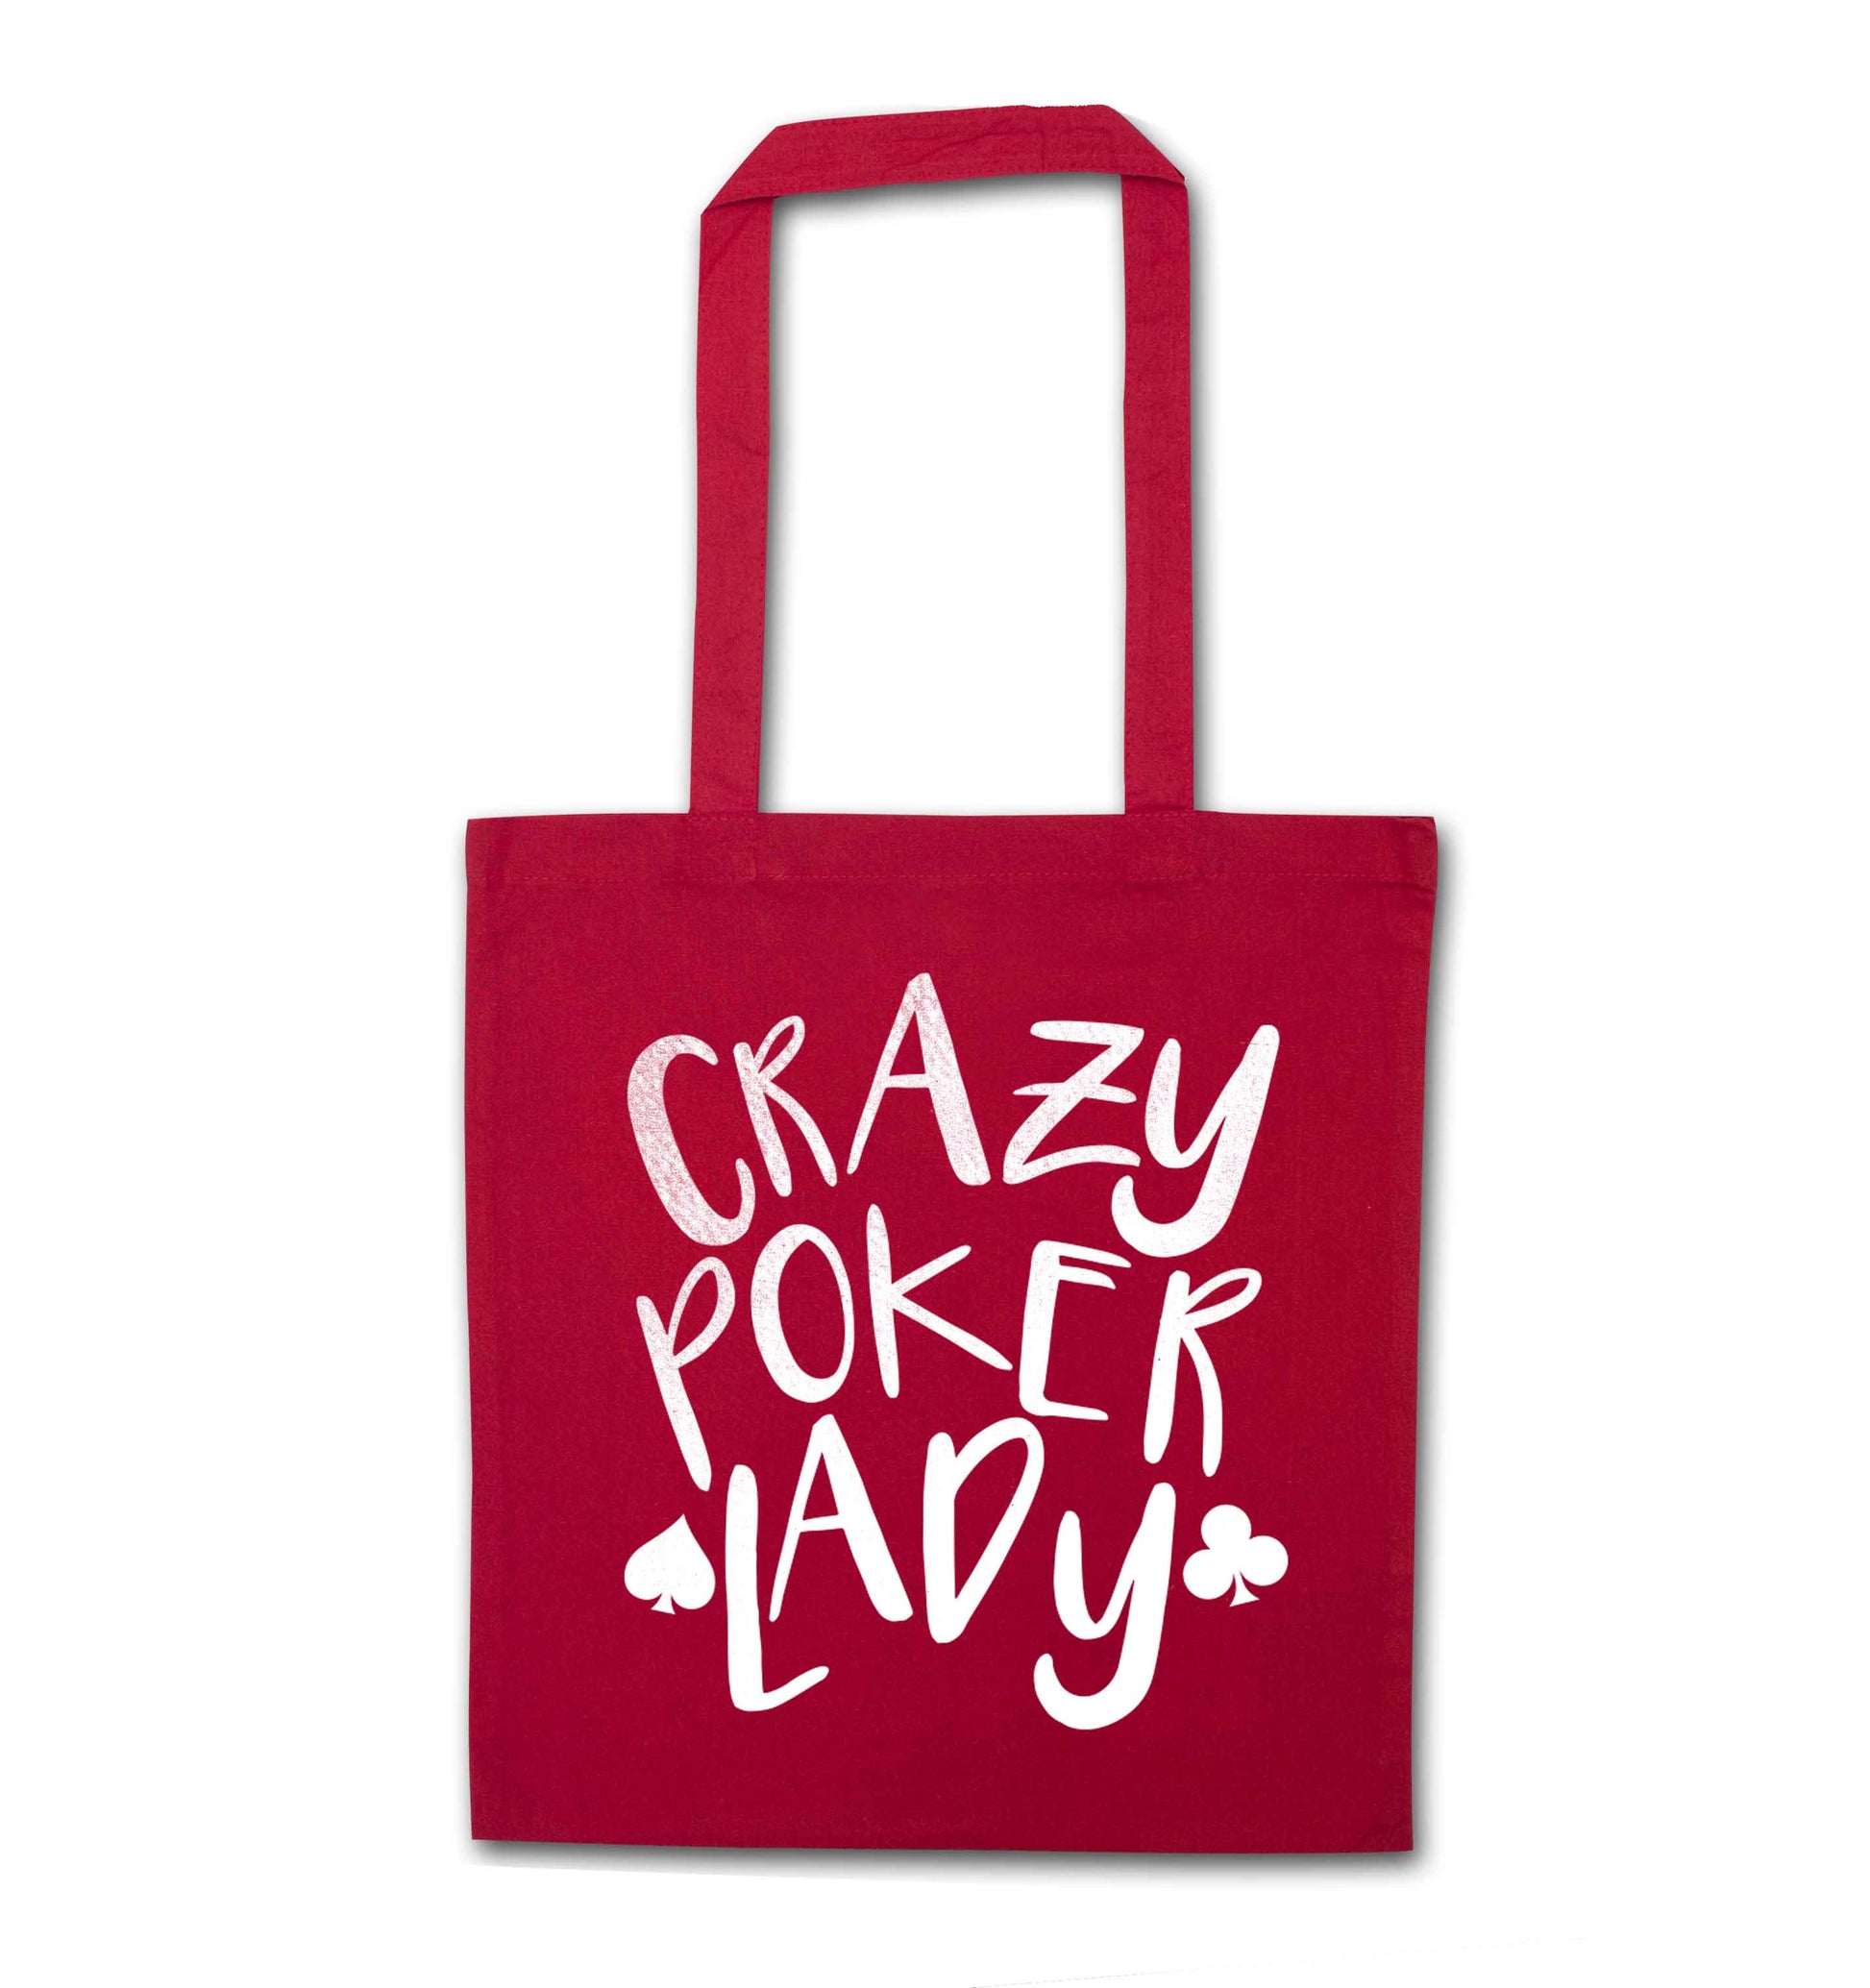 Crazy poker lady red tote bag